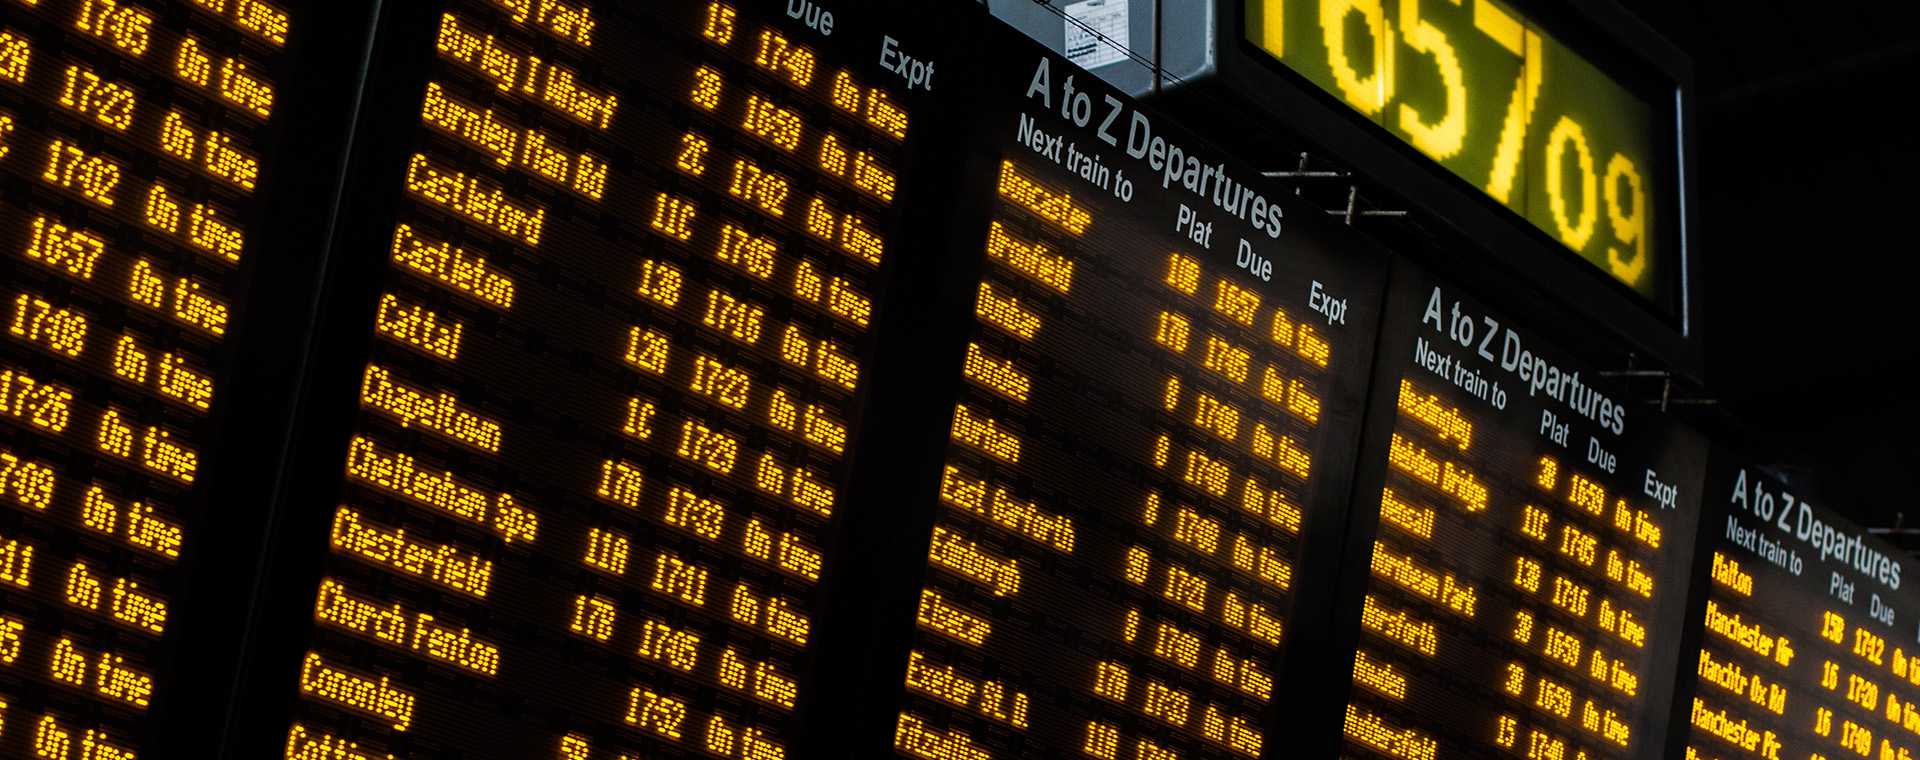 Arrivals and departures board at a station